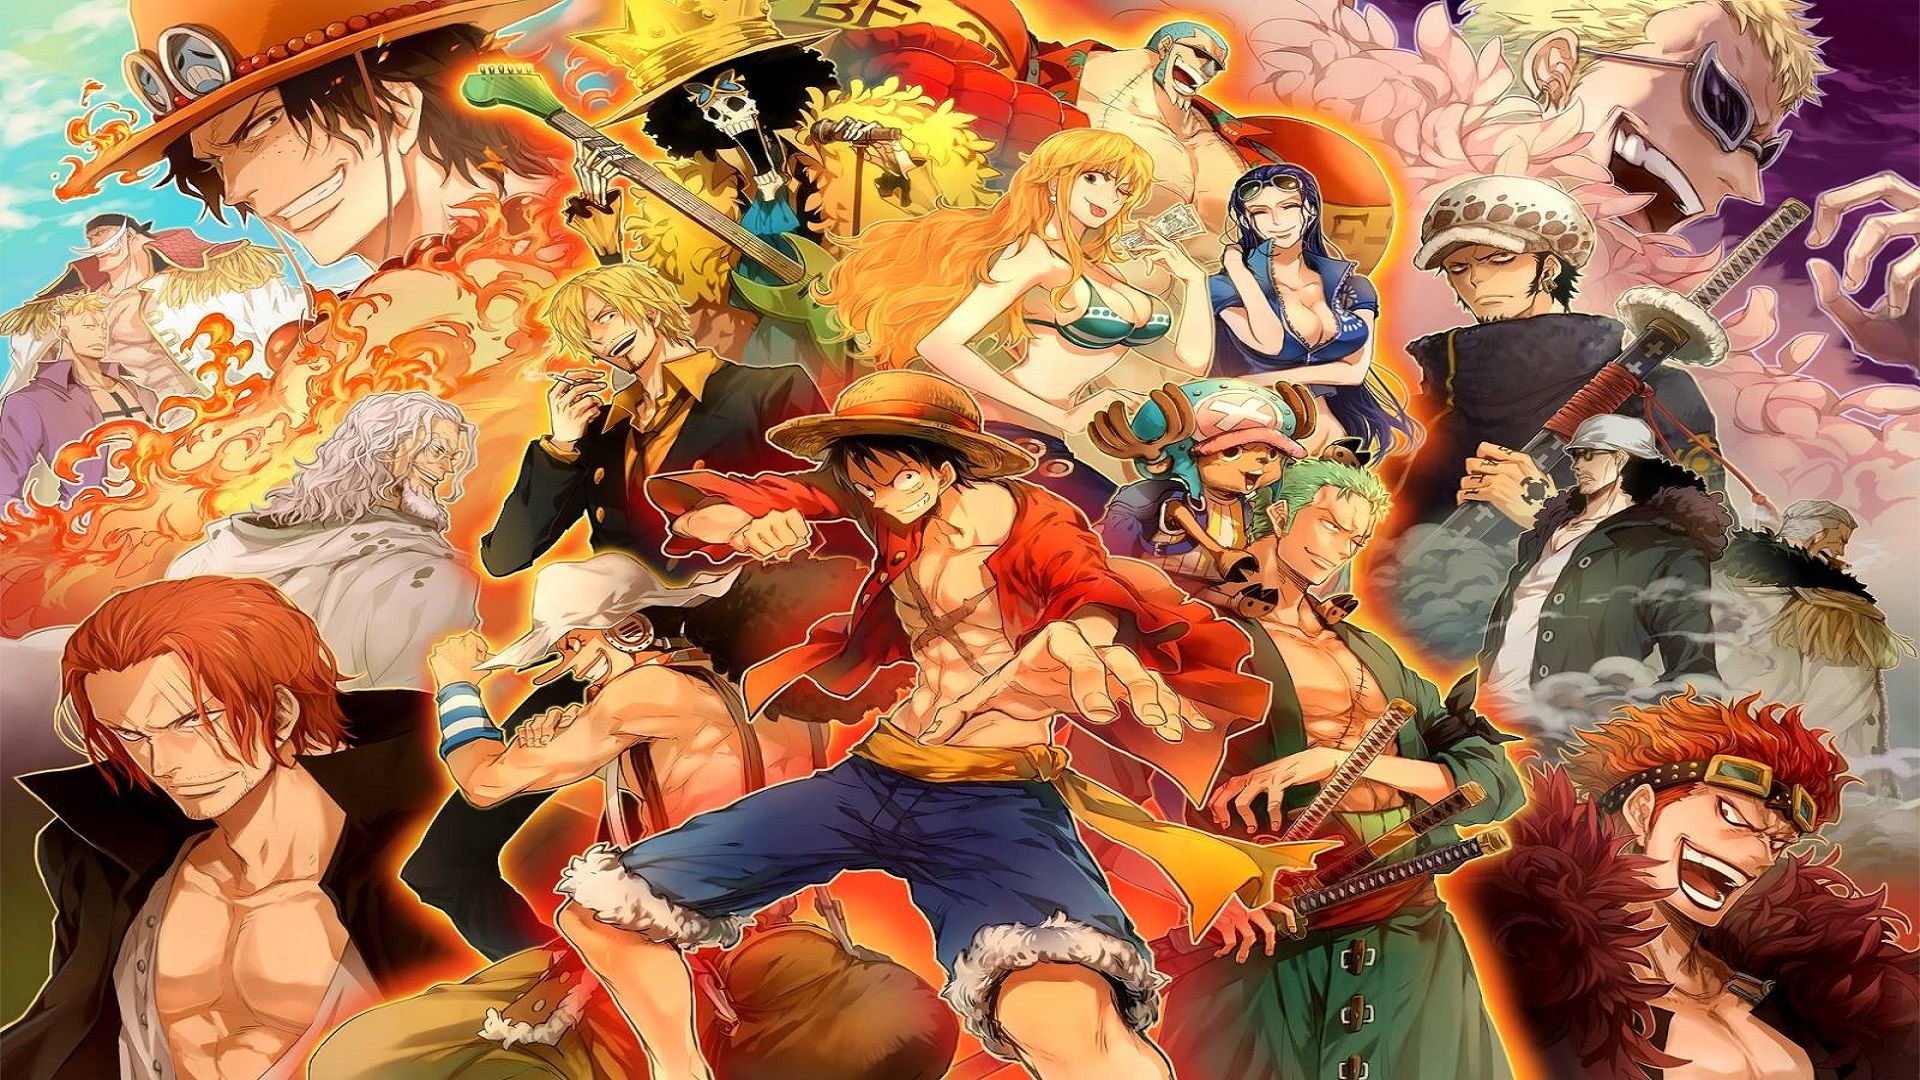 3 One Piece Pirate Warriors 3 HD Wallpapers | Backgrounds ...